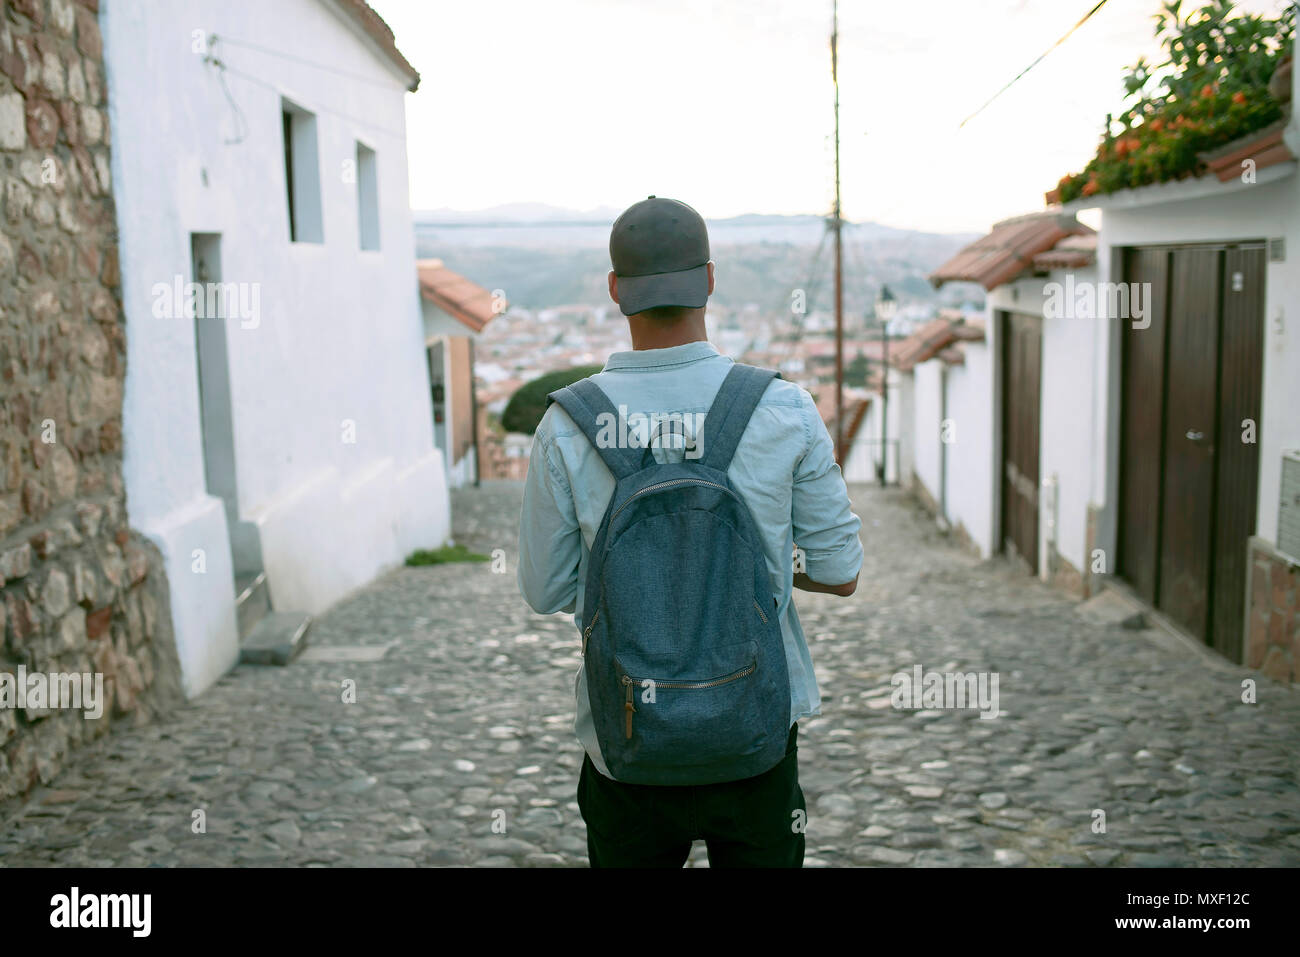 Rear view of tourist boy wearing backpack, exploring the town of Sucre, Bolivia. Stock Photo